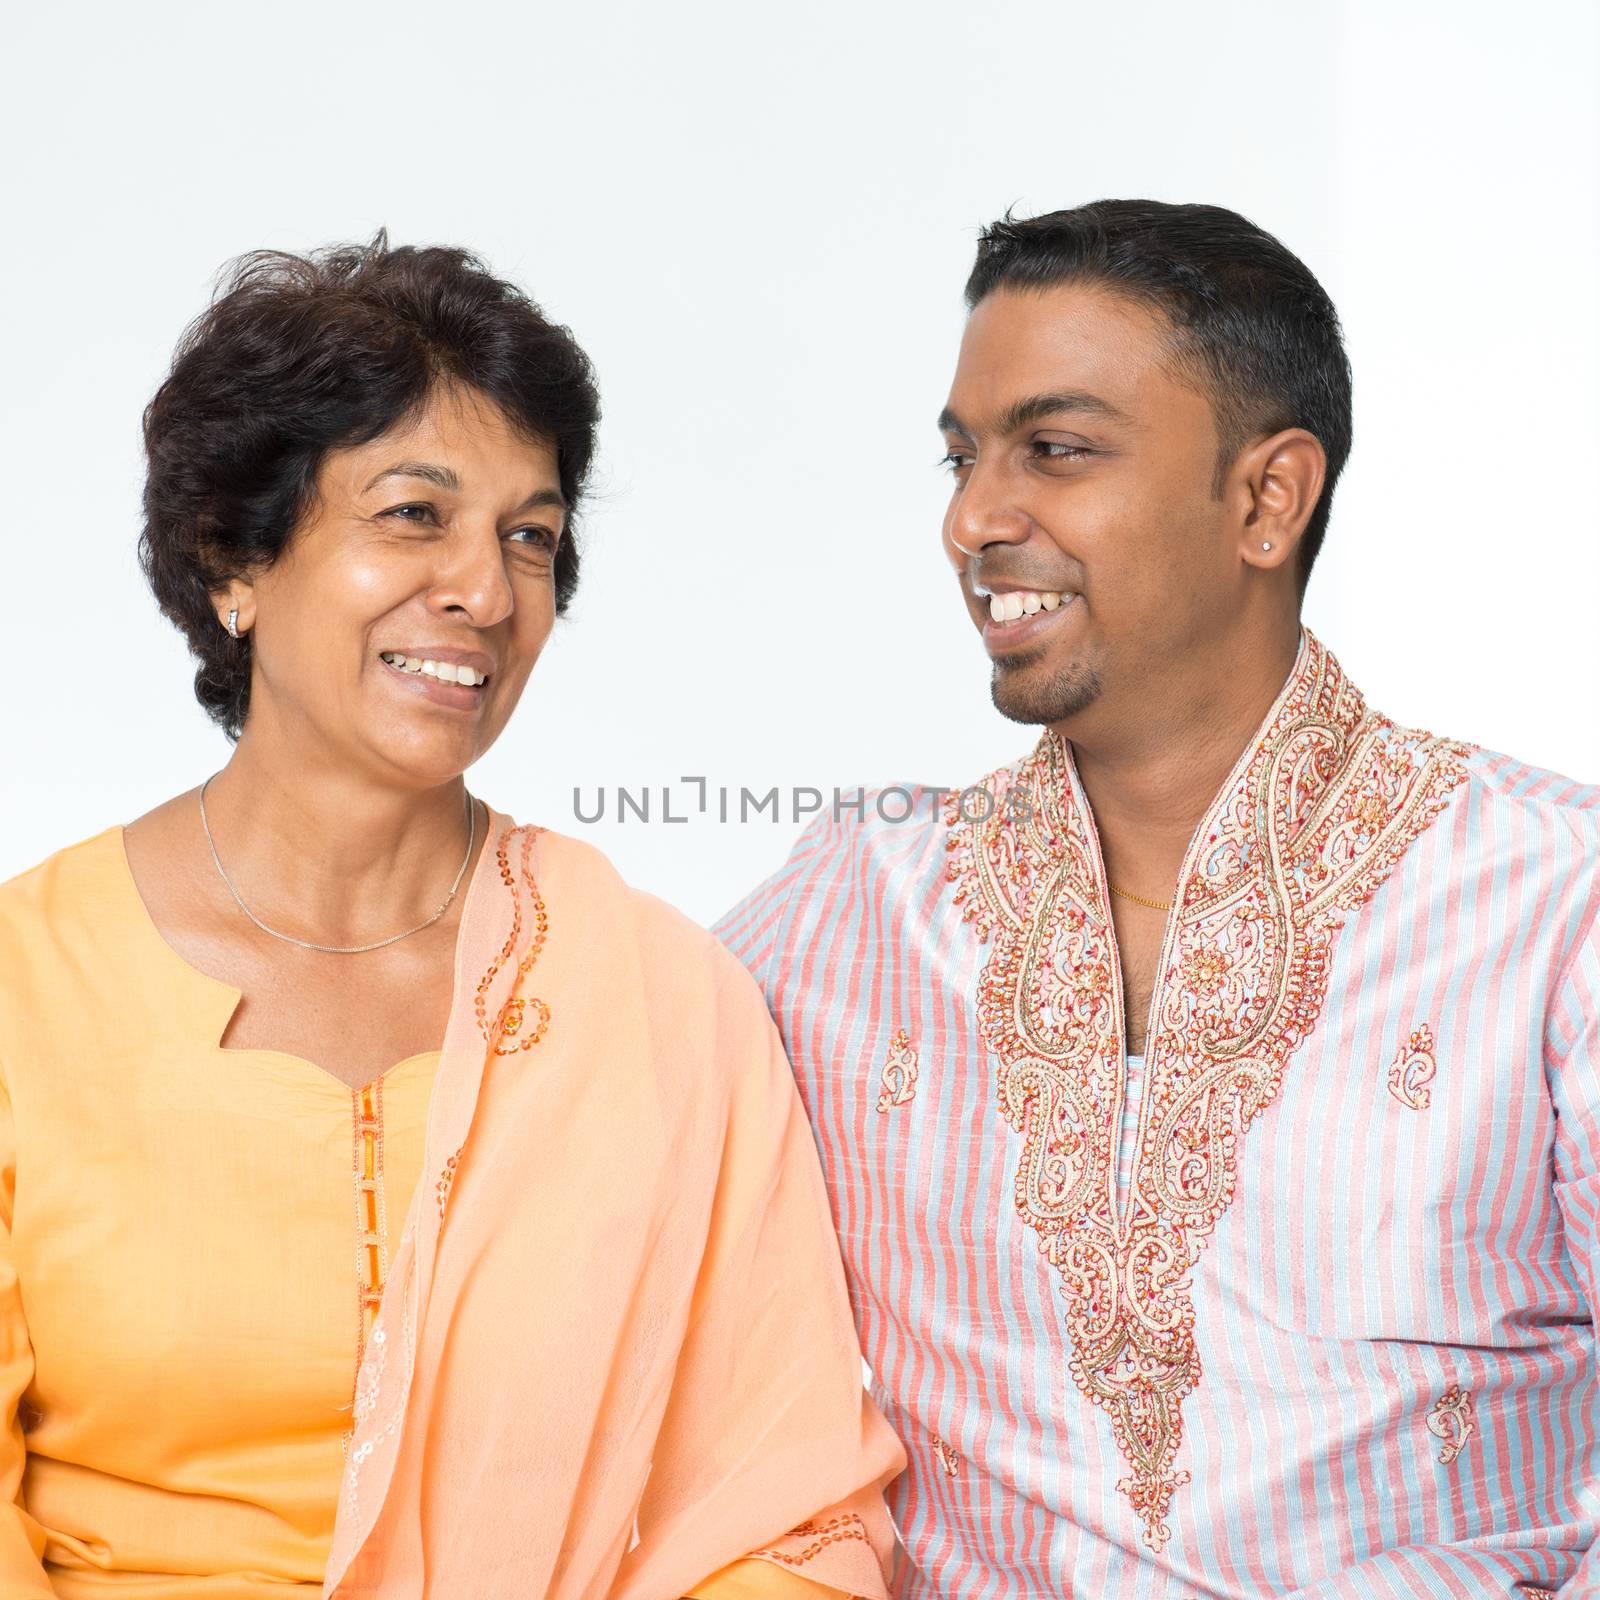 Portrait of happy Indian family communicating at home. Mature 50s Indian mother and her 30s grown son.